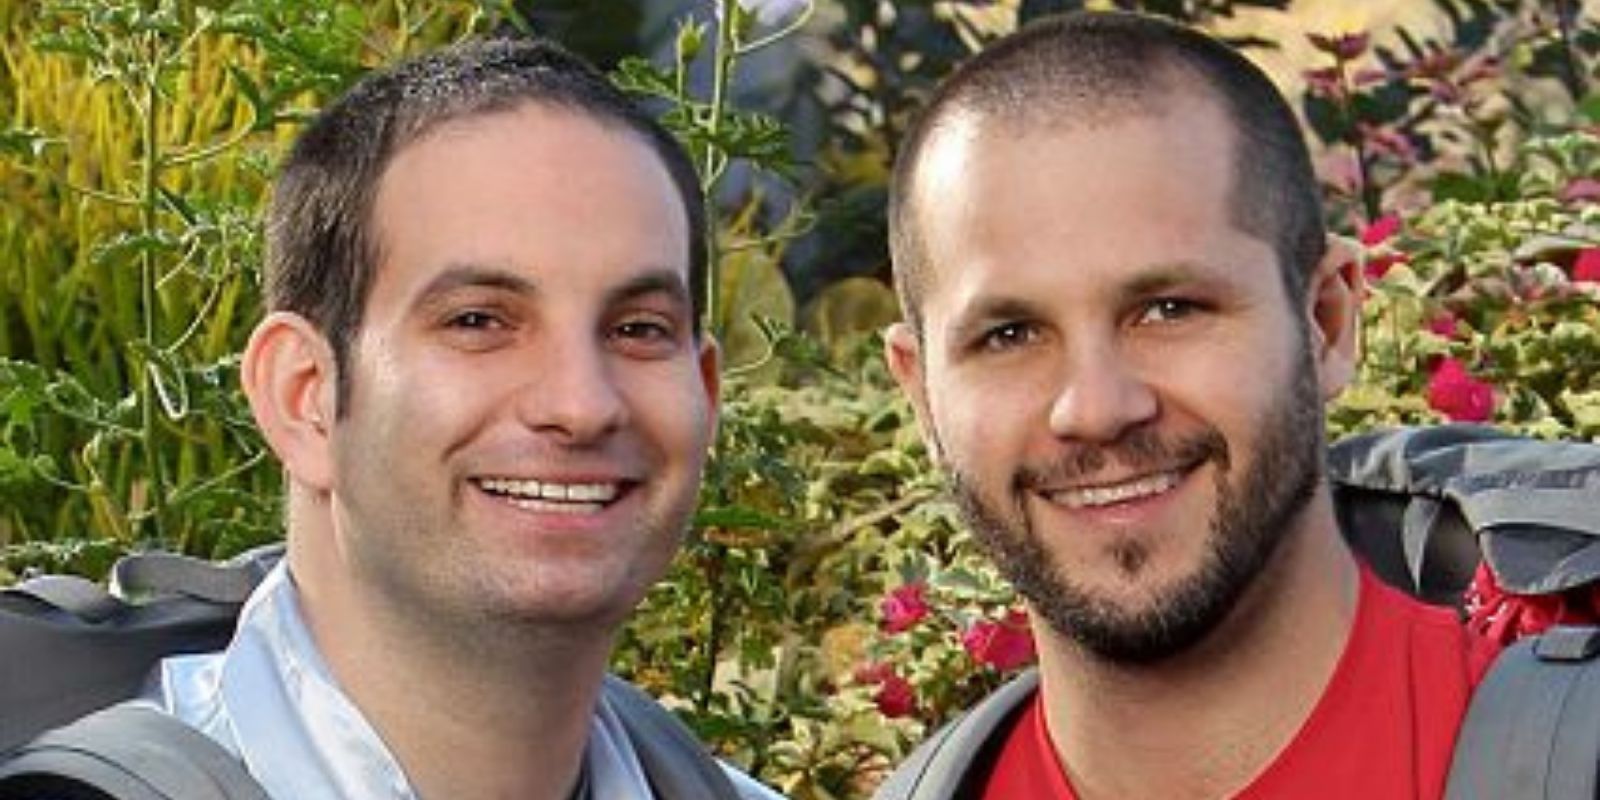 An image of Zev and Justin from The Amazing Race